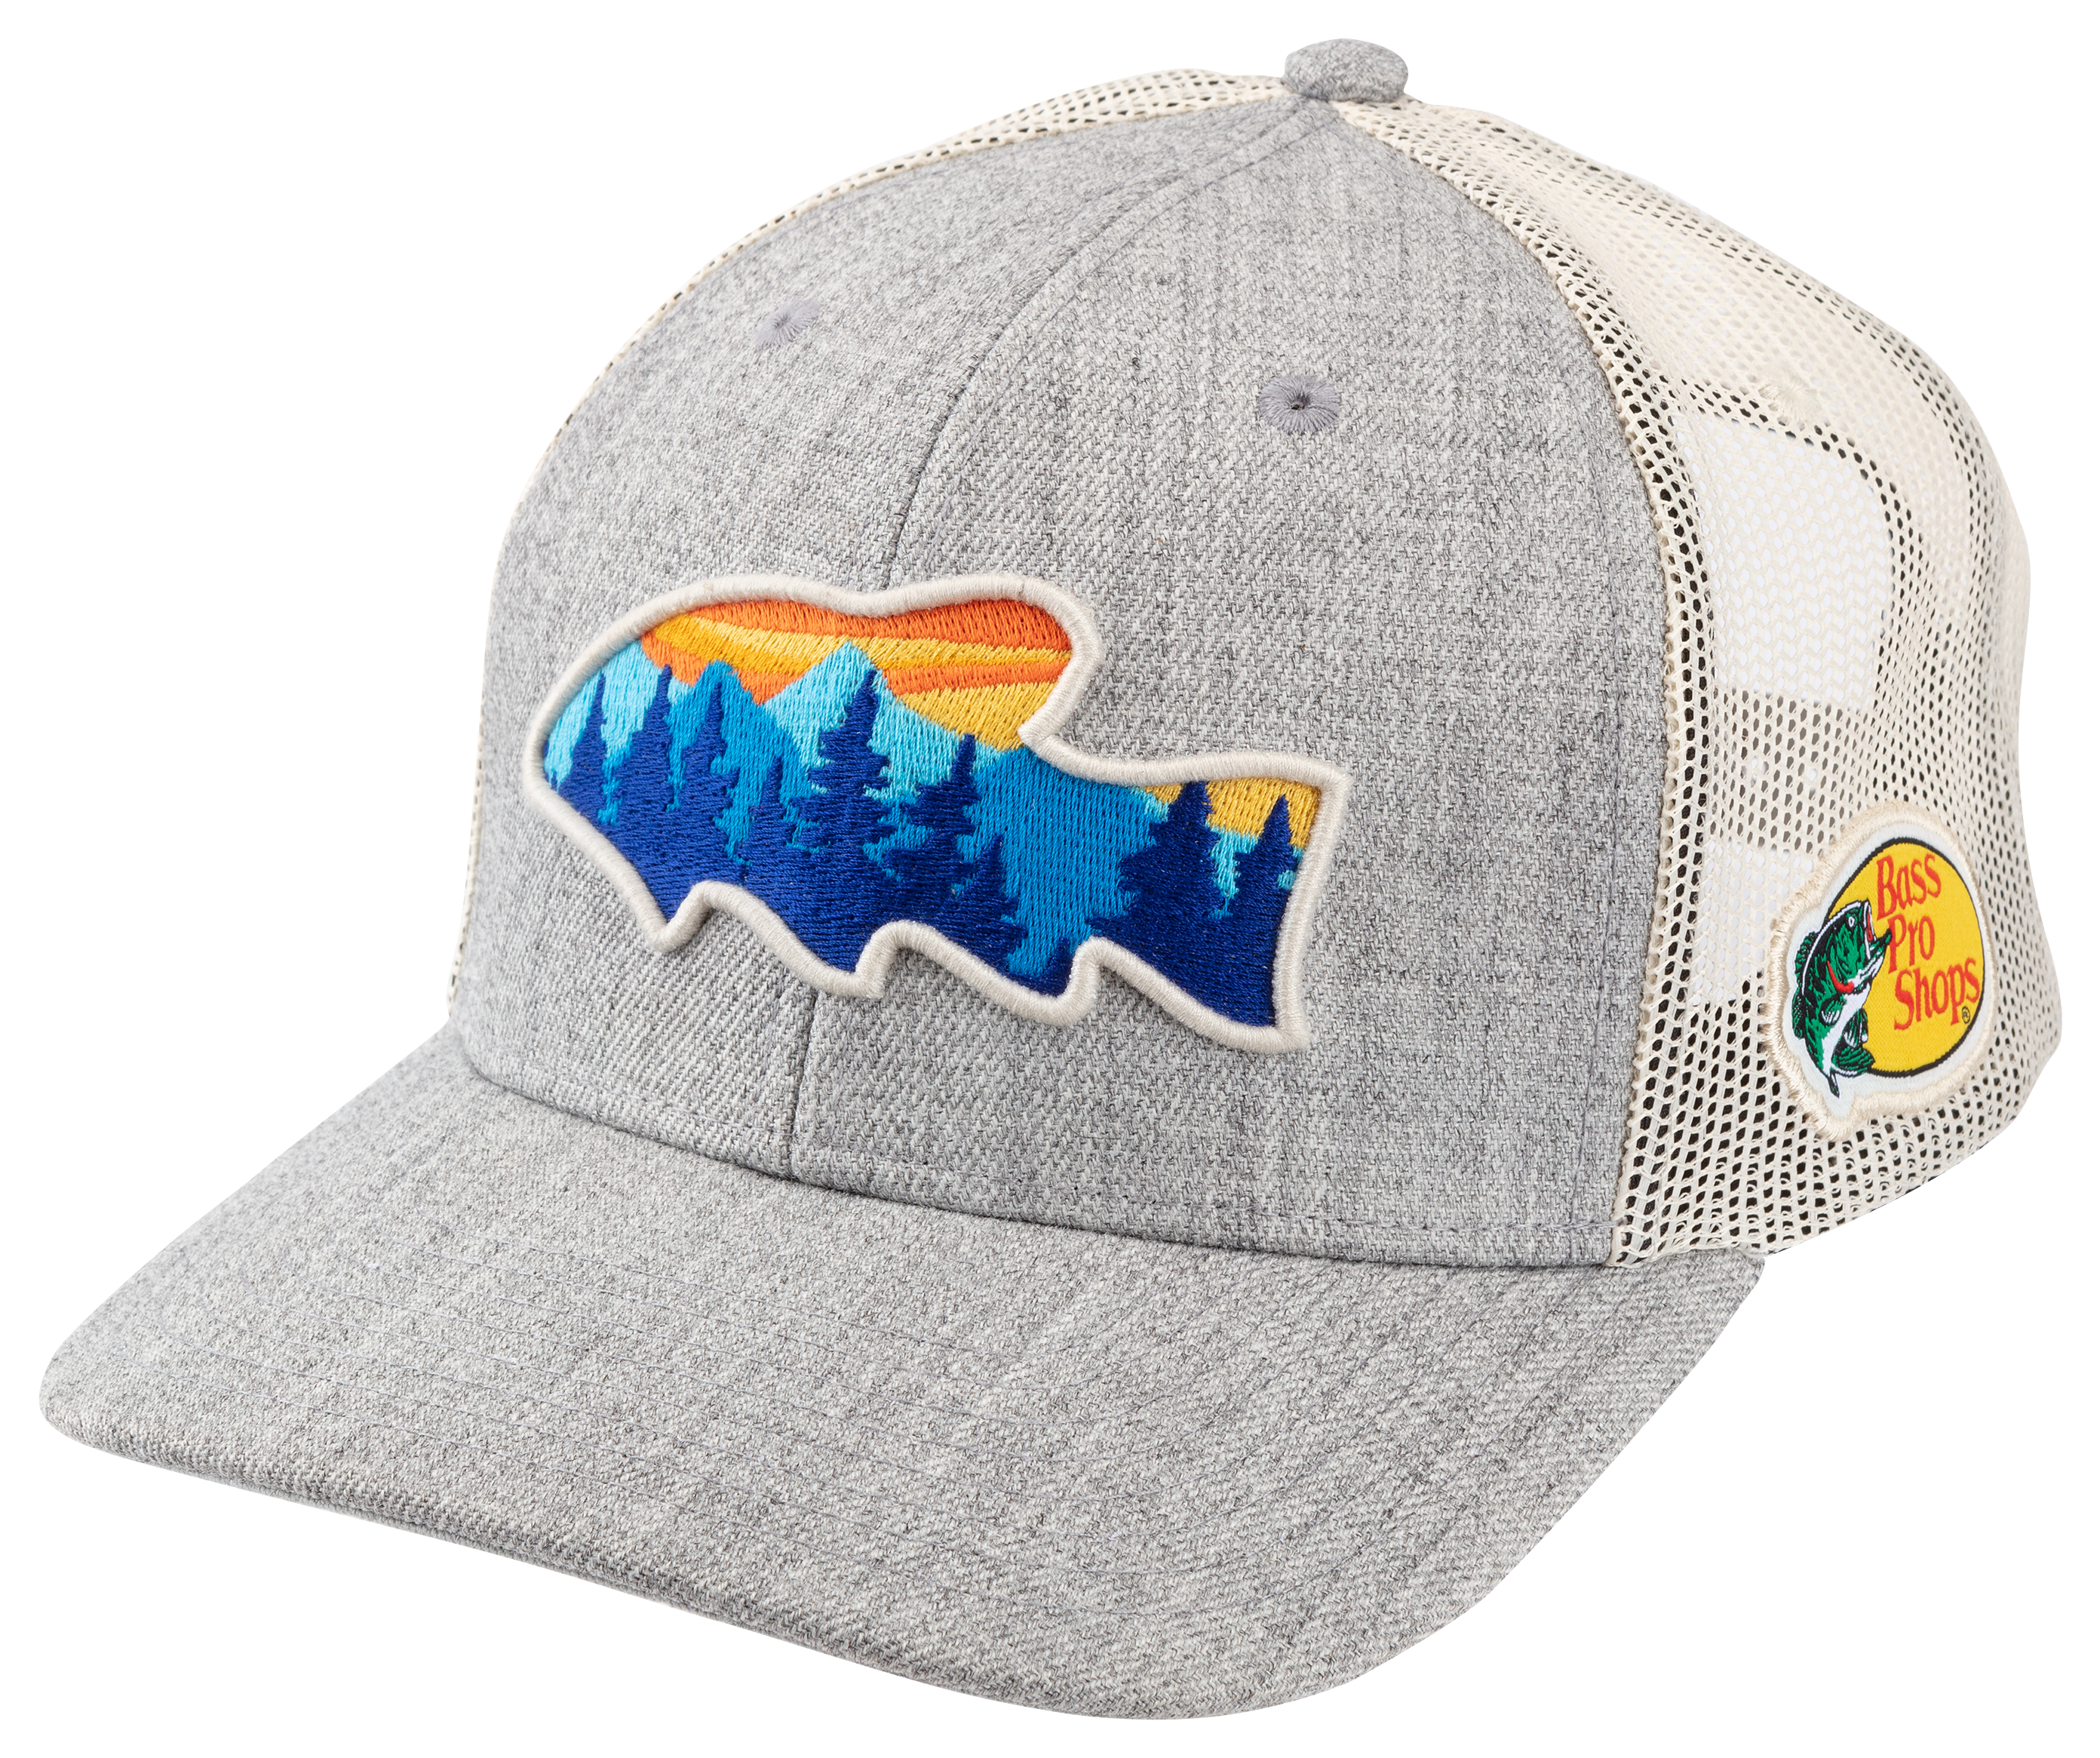 Local Crowns Fish Night Views Collection Snapback Trucker Fishing